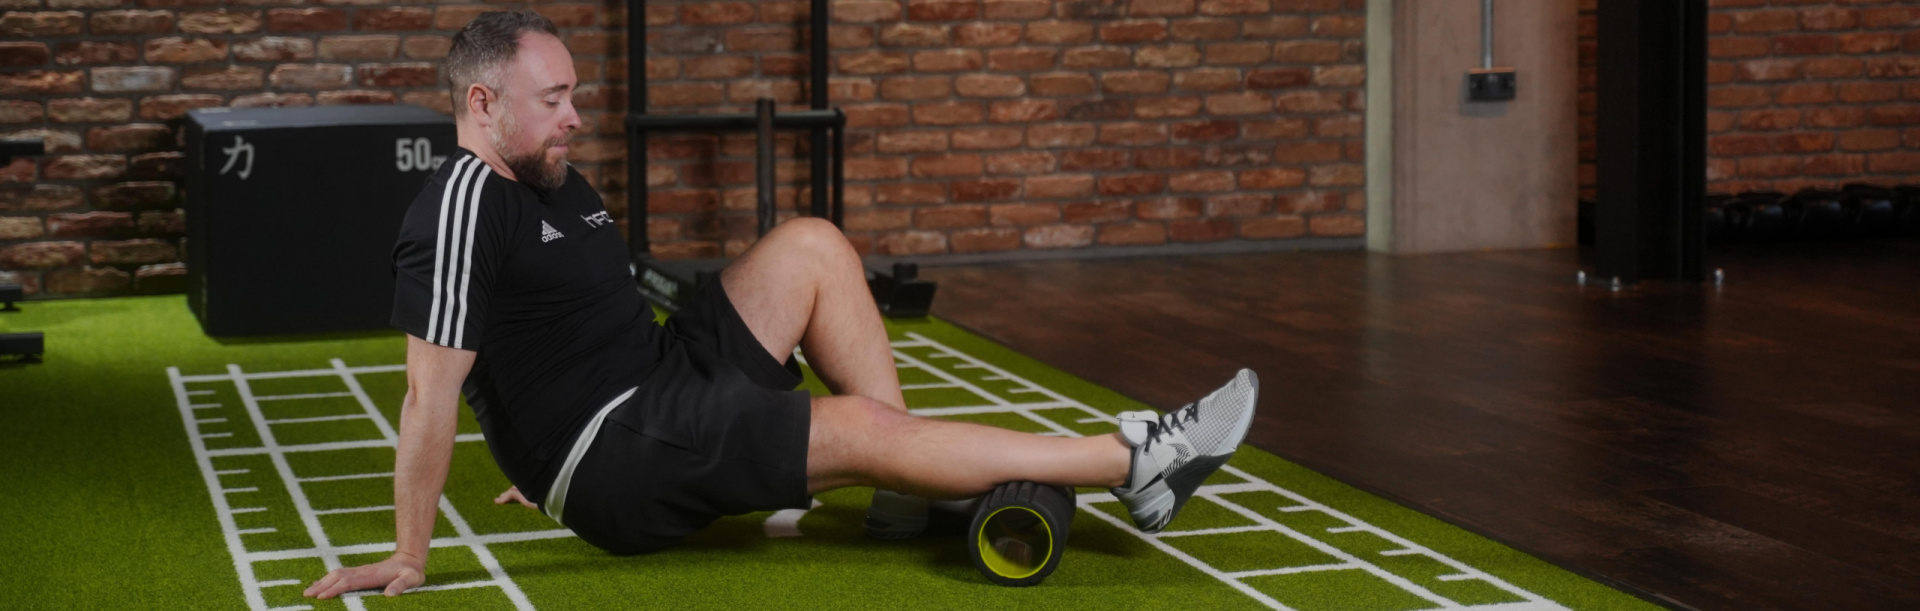 Foam Roller Exercises For Runners - Your Ultimate Guide with Videos!